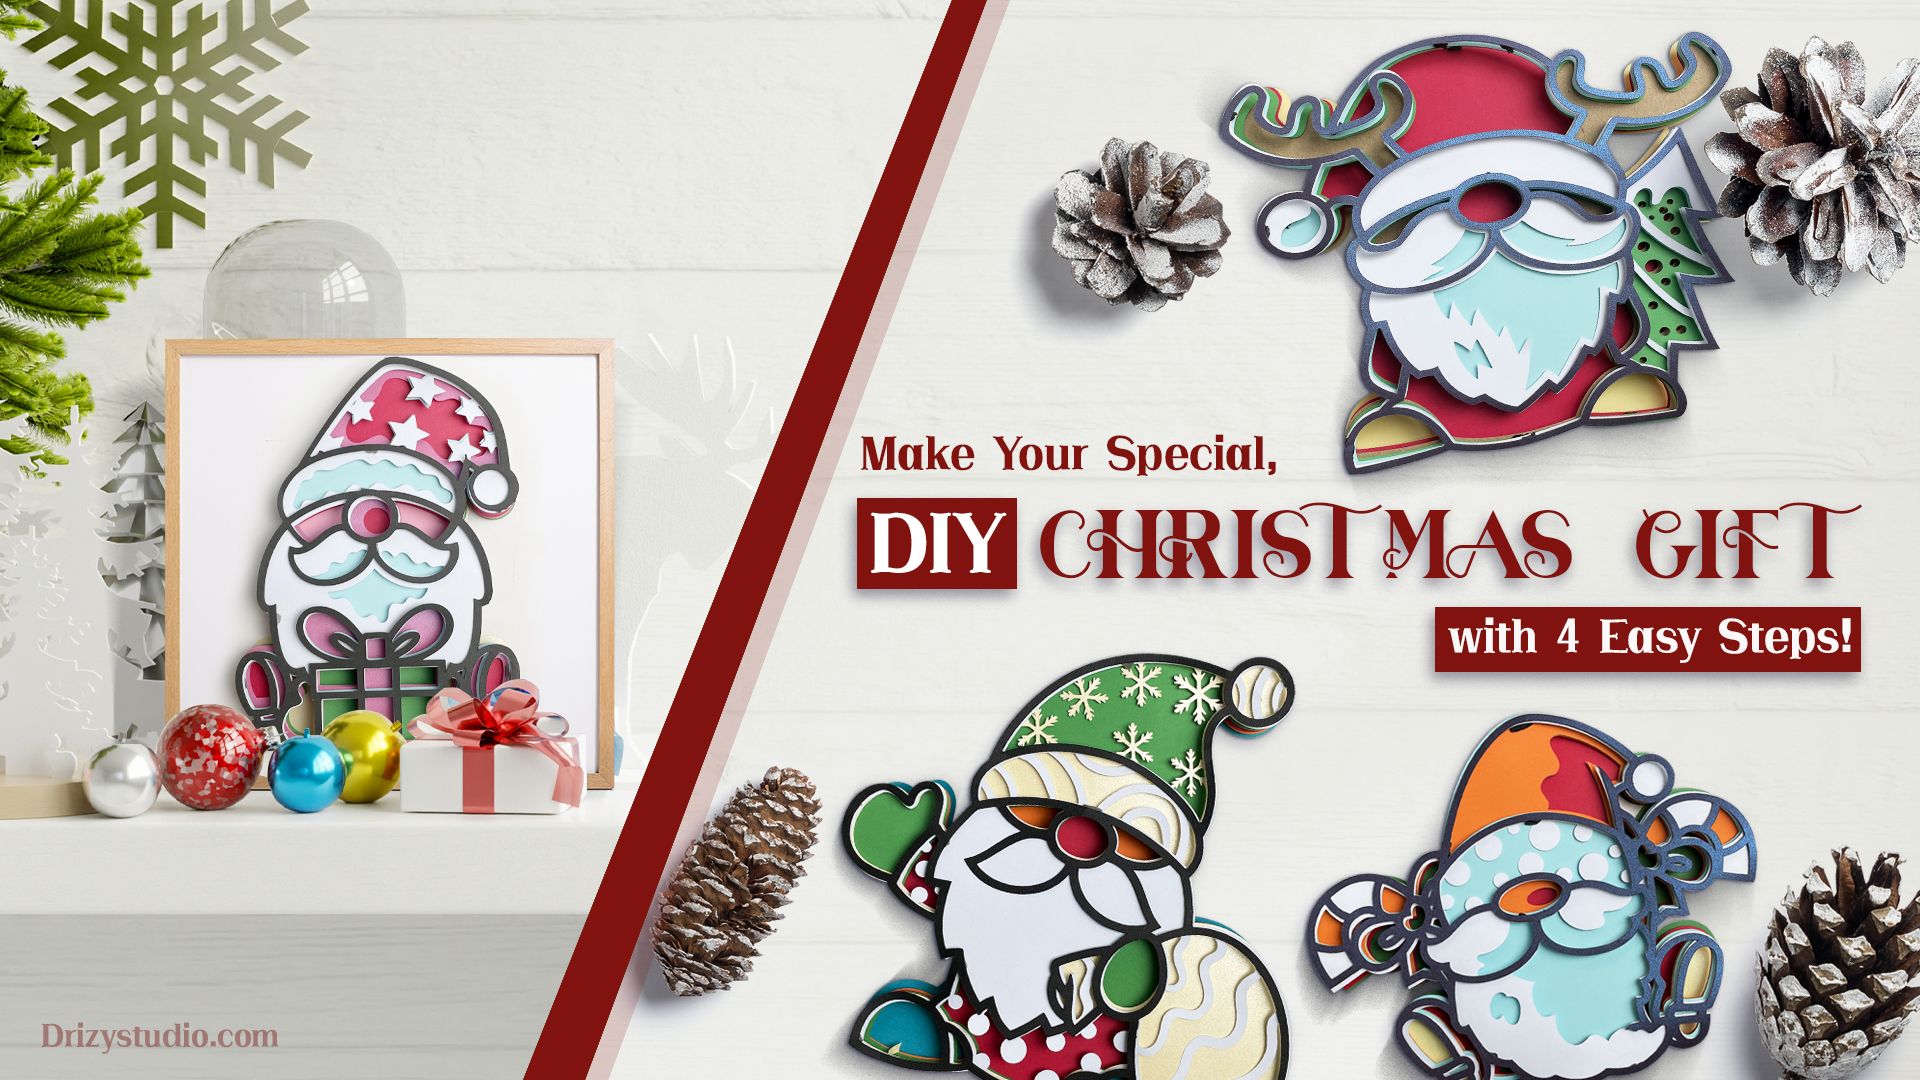 Make Your DIY Special Gift for Christmas with 4 Easy Steps!